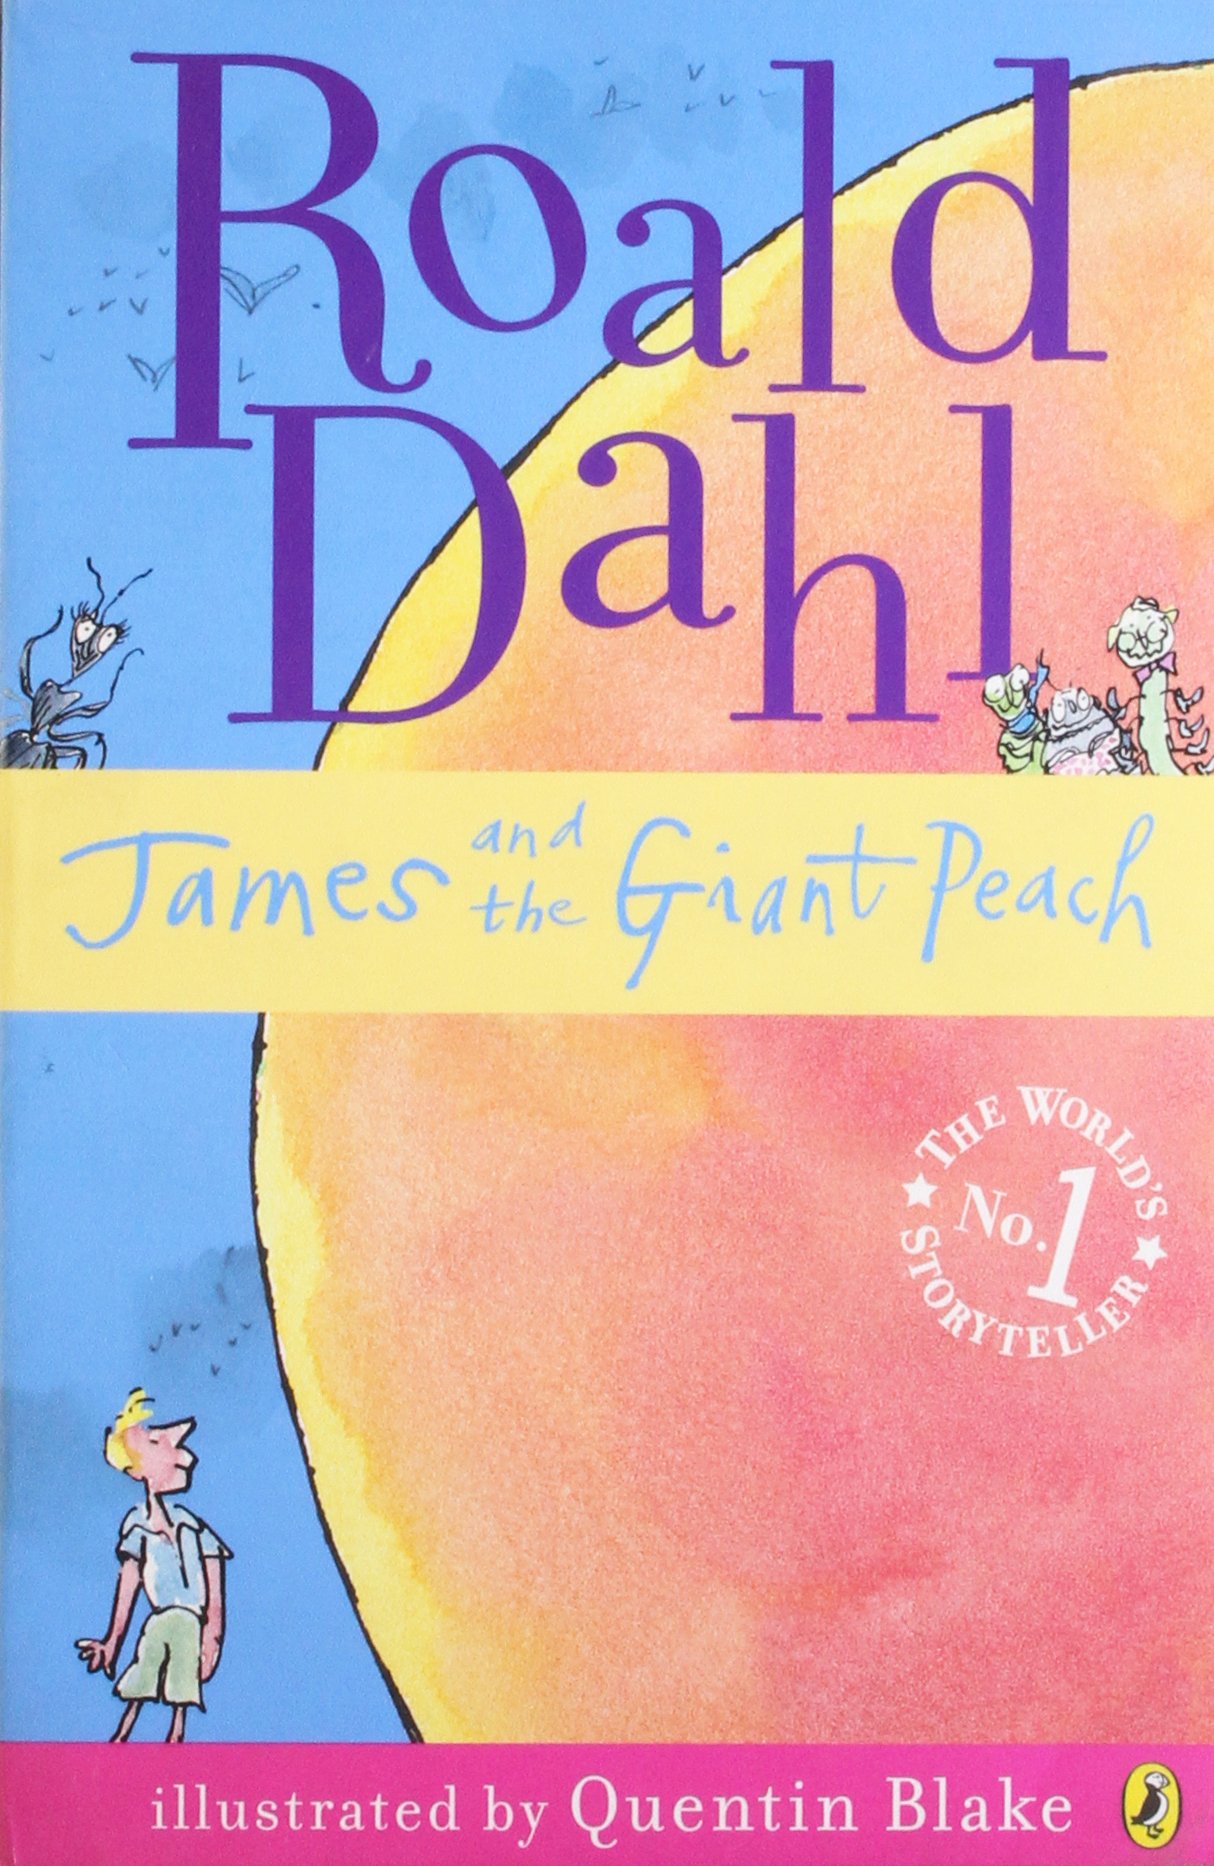 Cover image of the book, James and the Giant Peach